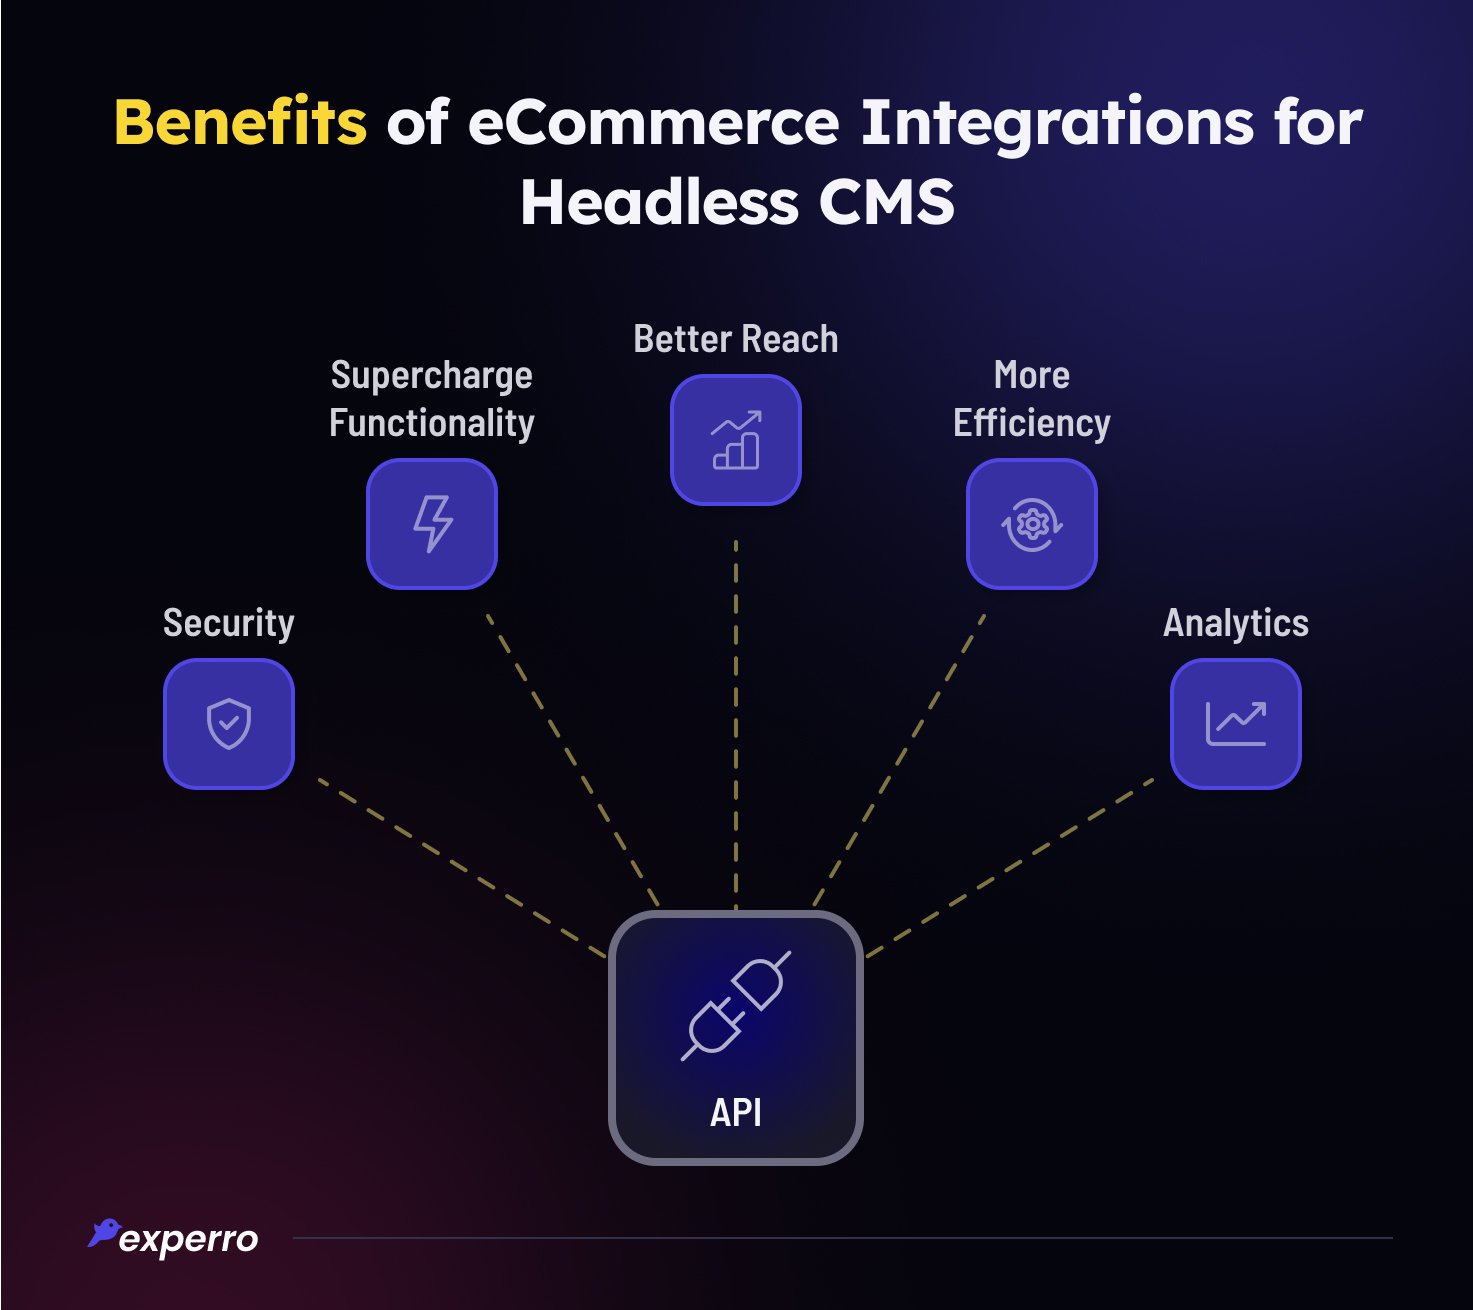 Benefits of Integrating eCommerce with Headless CMS